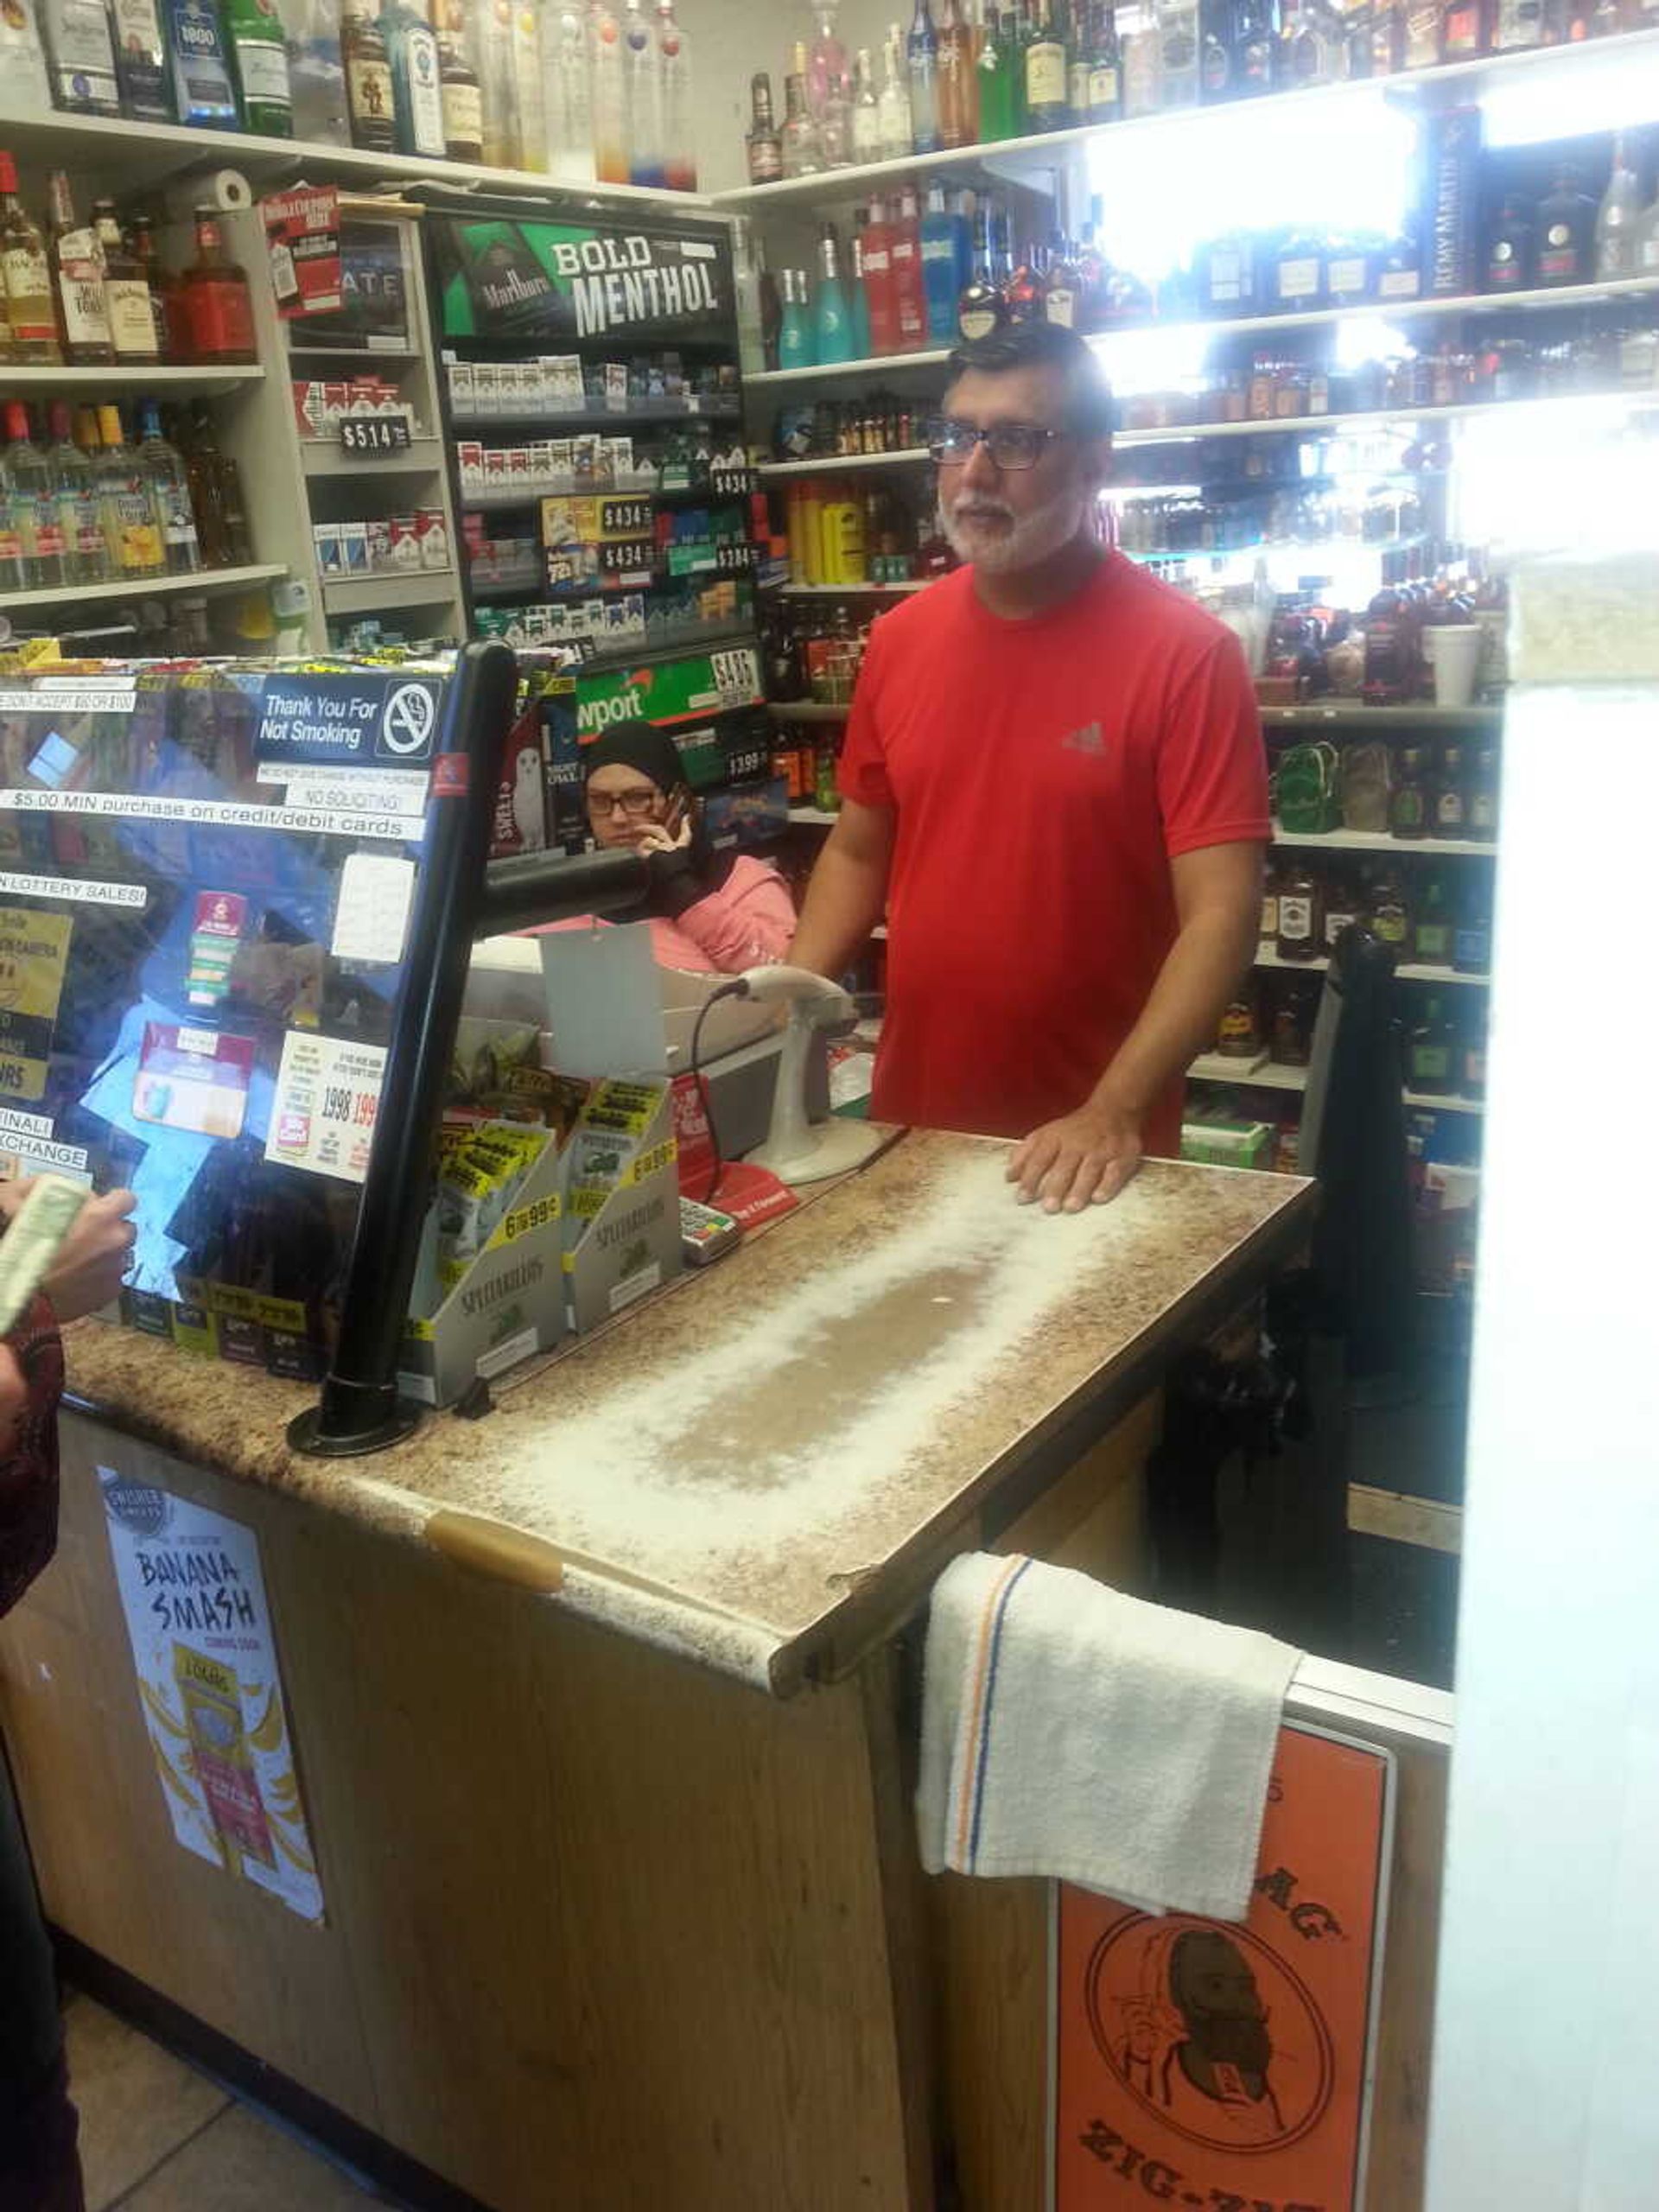 Asif “Steve” Majeed, the owner of SEMO gas, works behind the counter of his gas station and convenience store.